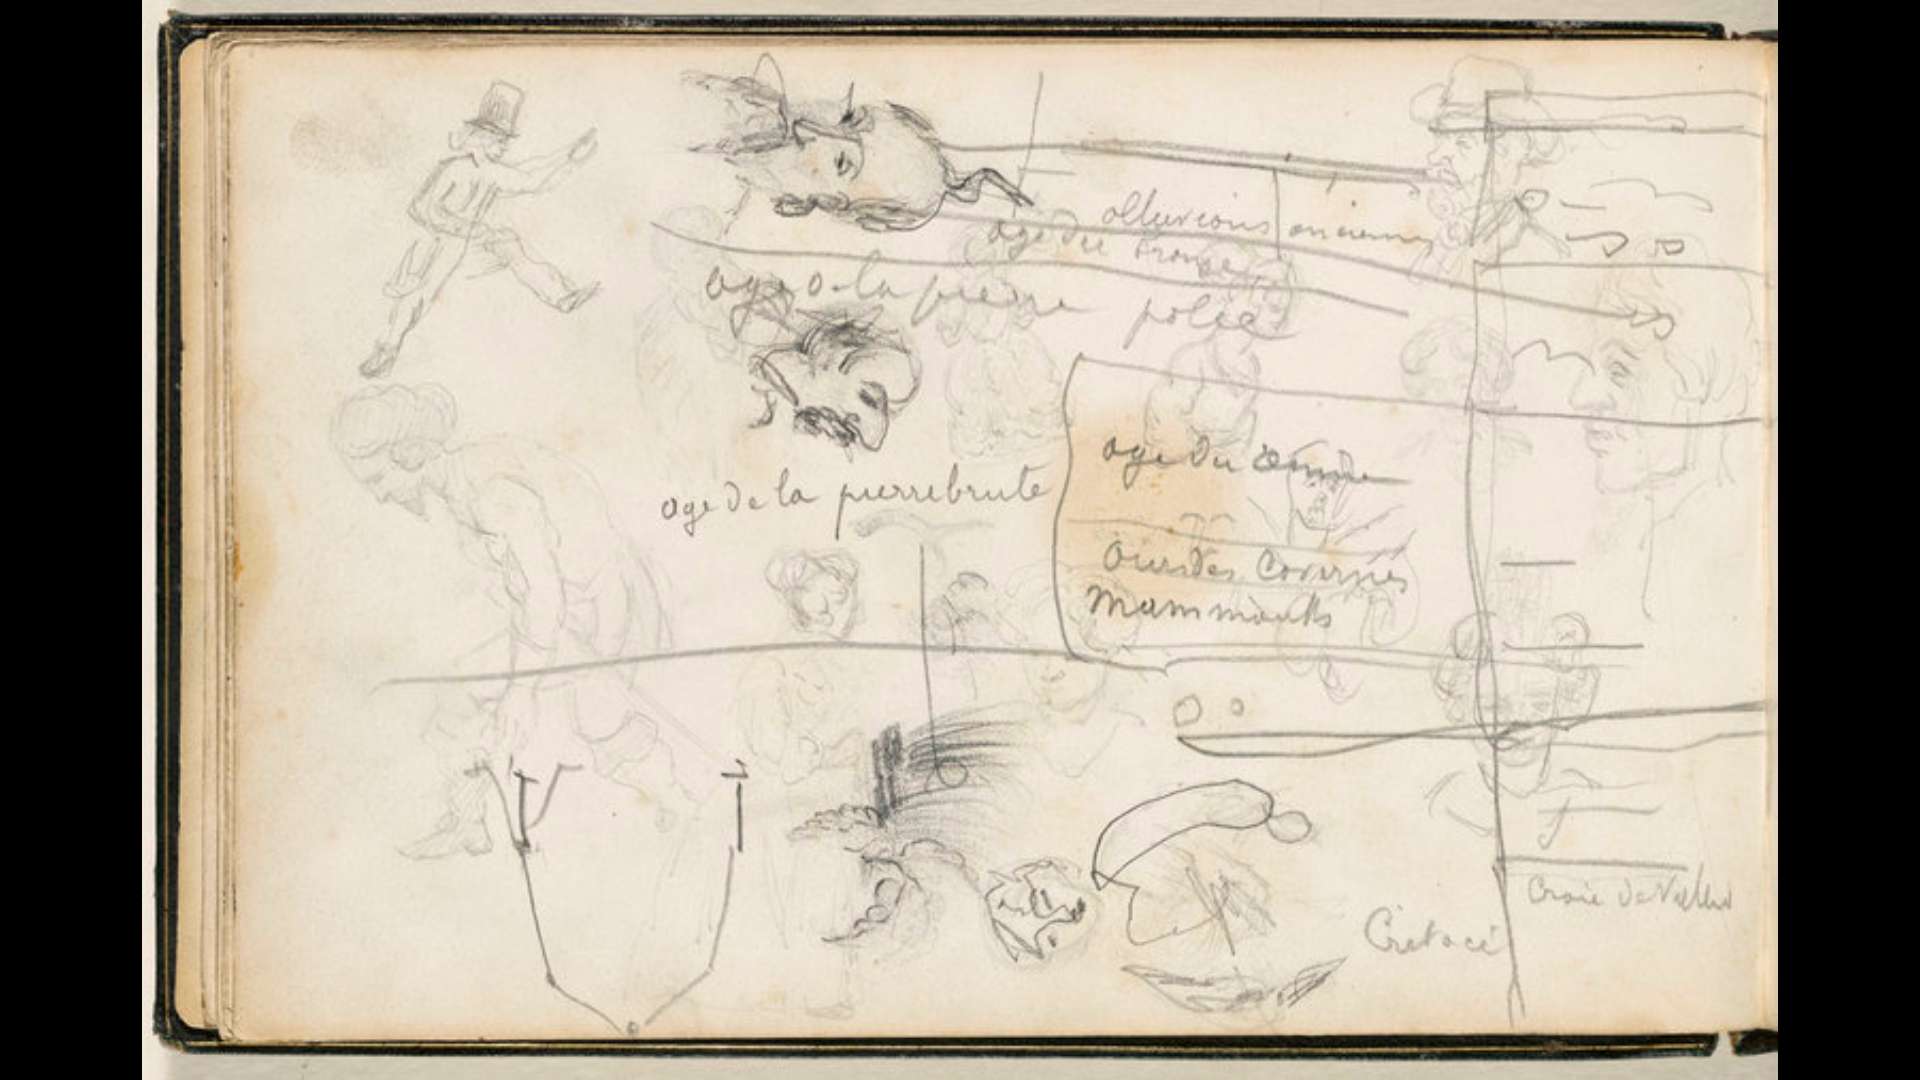 Paul Cézanne (sketches) and Antoine-Fortuné Marion (inscriptions)                                                 double-page spread from a notebook - with characters, caricatured faces, stratifications and geological terms, towards 1866-1867, pencil on paper, Paris, Musée d’Orsay.